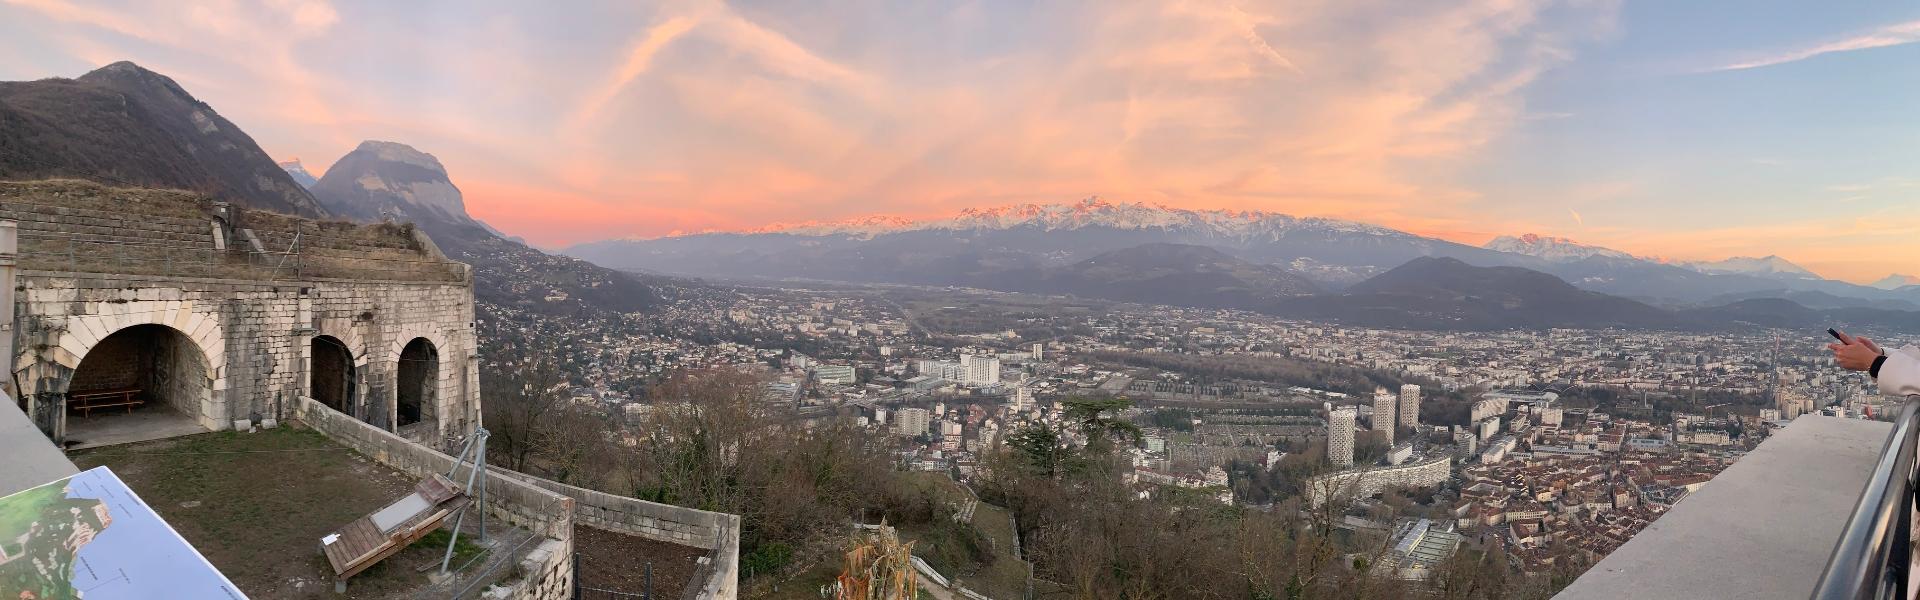 A sunset panoramic view of Bastille in the winter, a 30-minute hike up from the main city (photo: Sasha Soda)